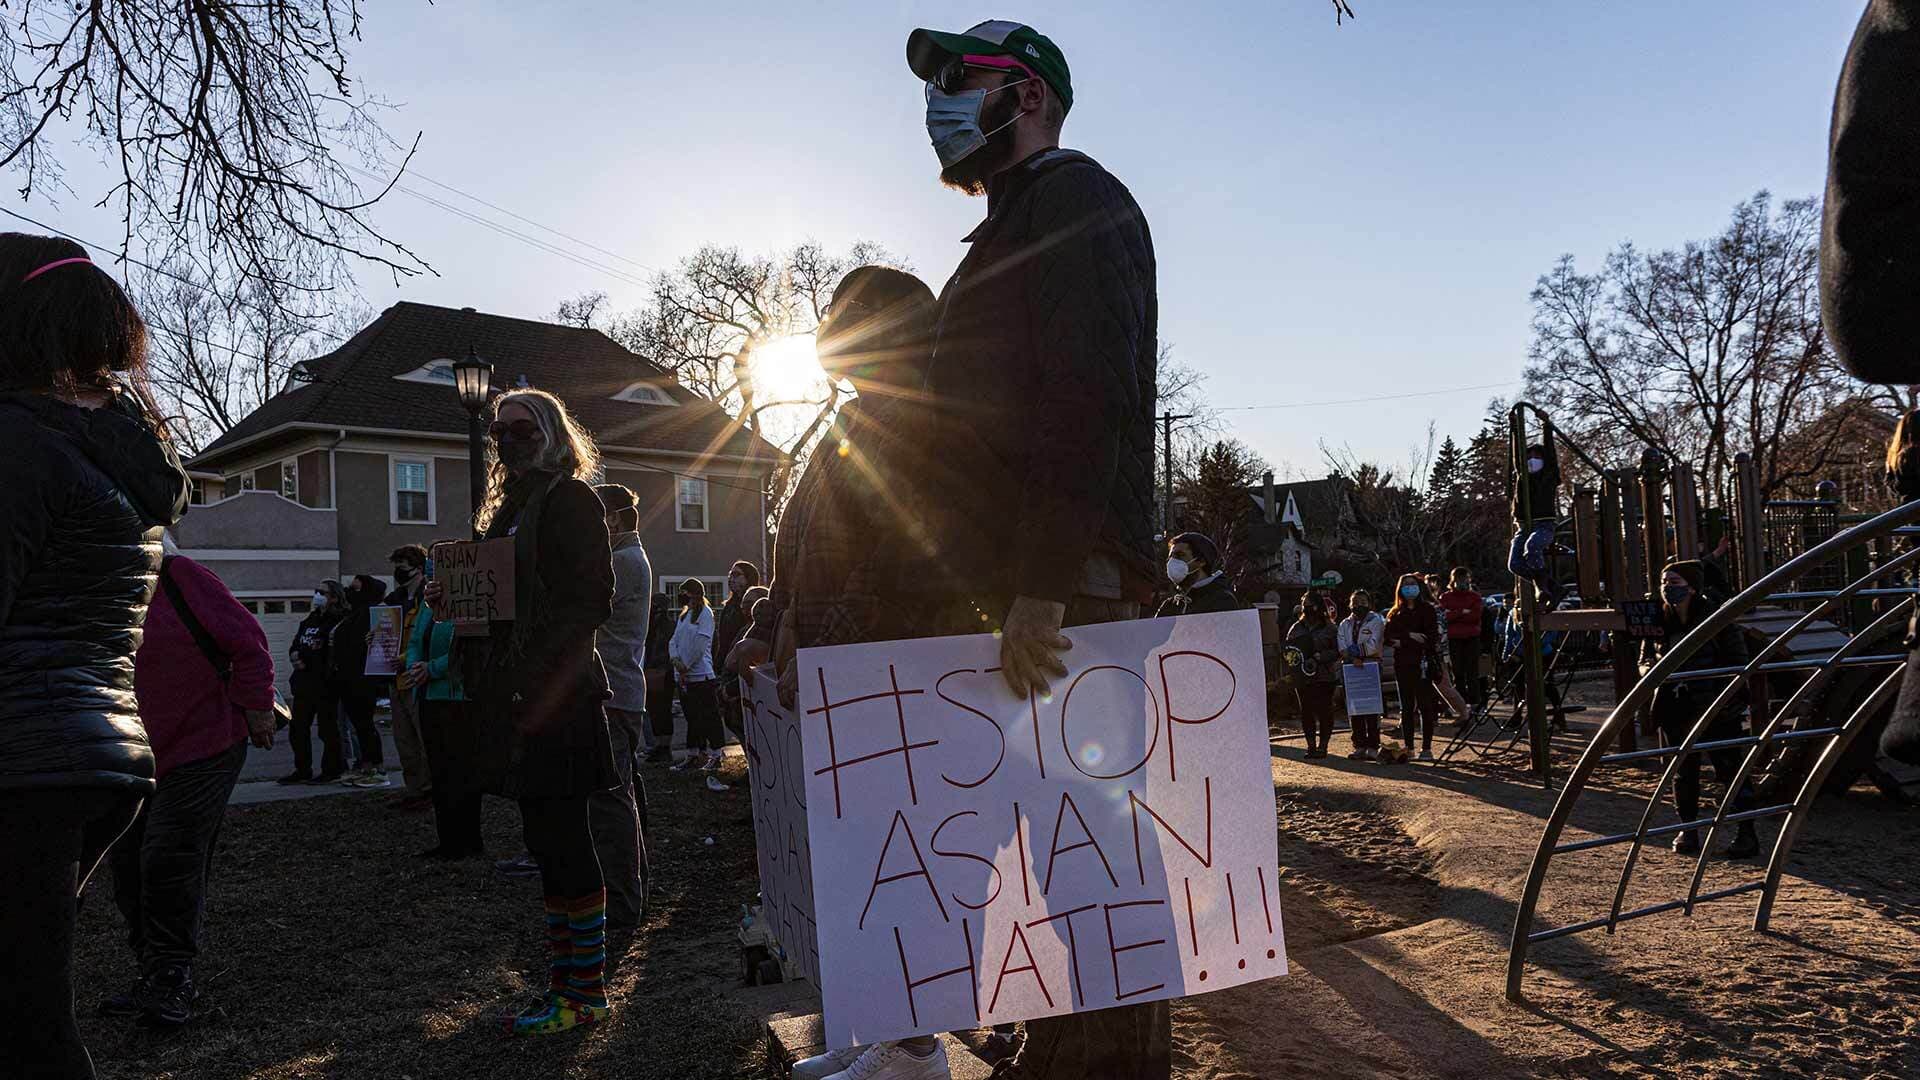 Person holding "Stop Asian Hate" sign